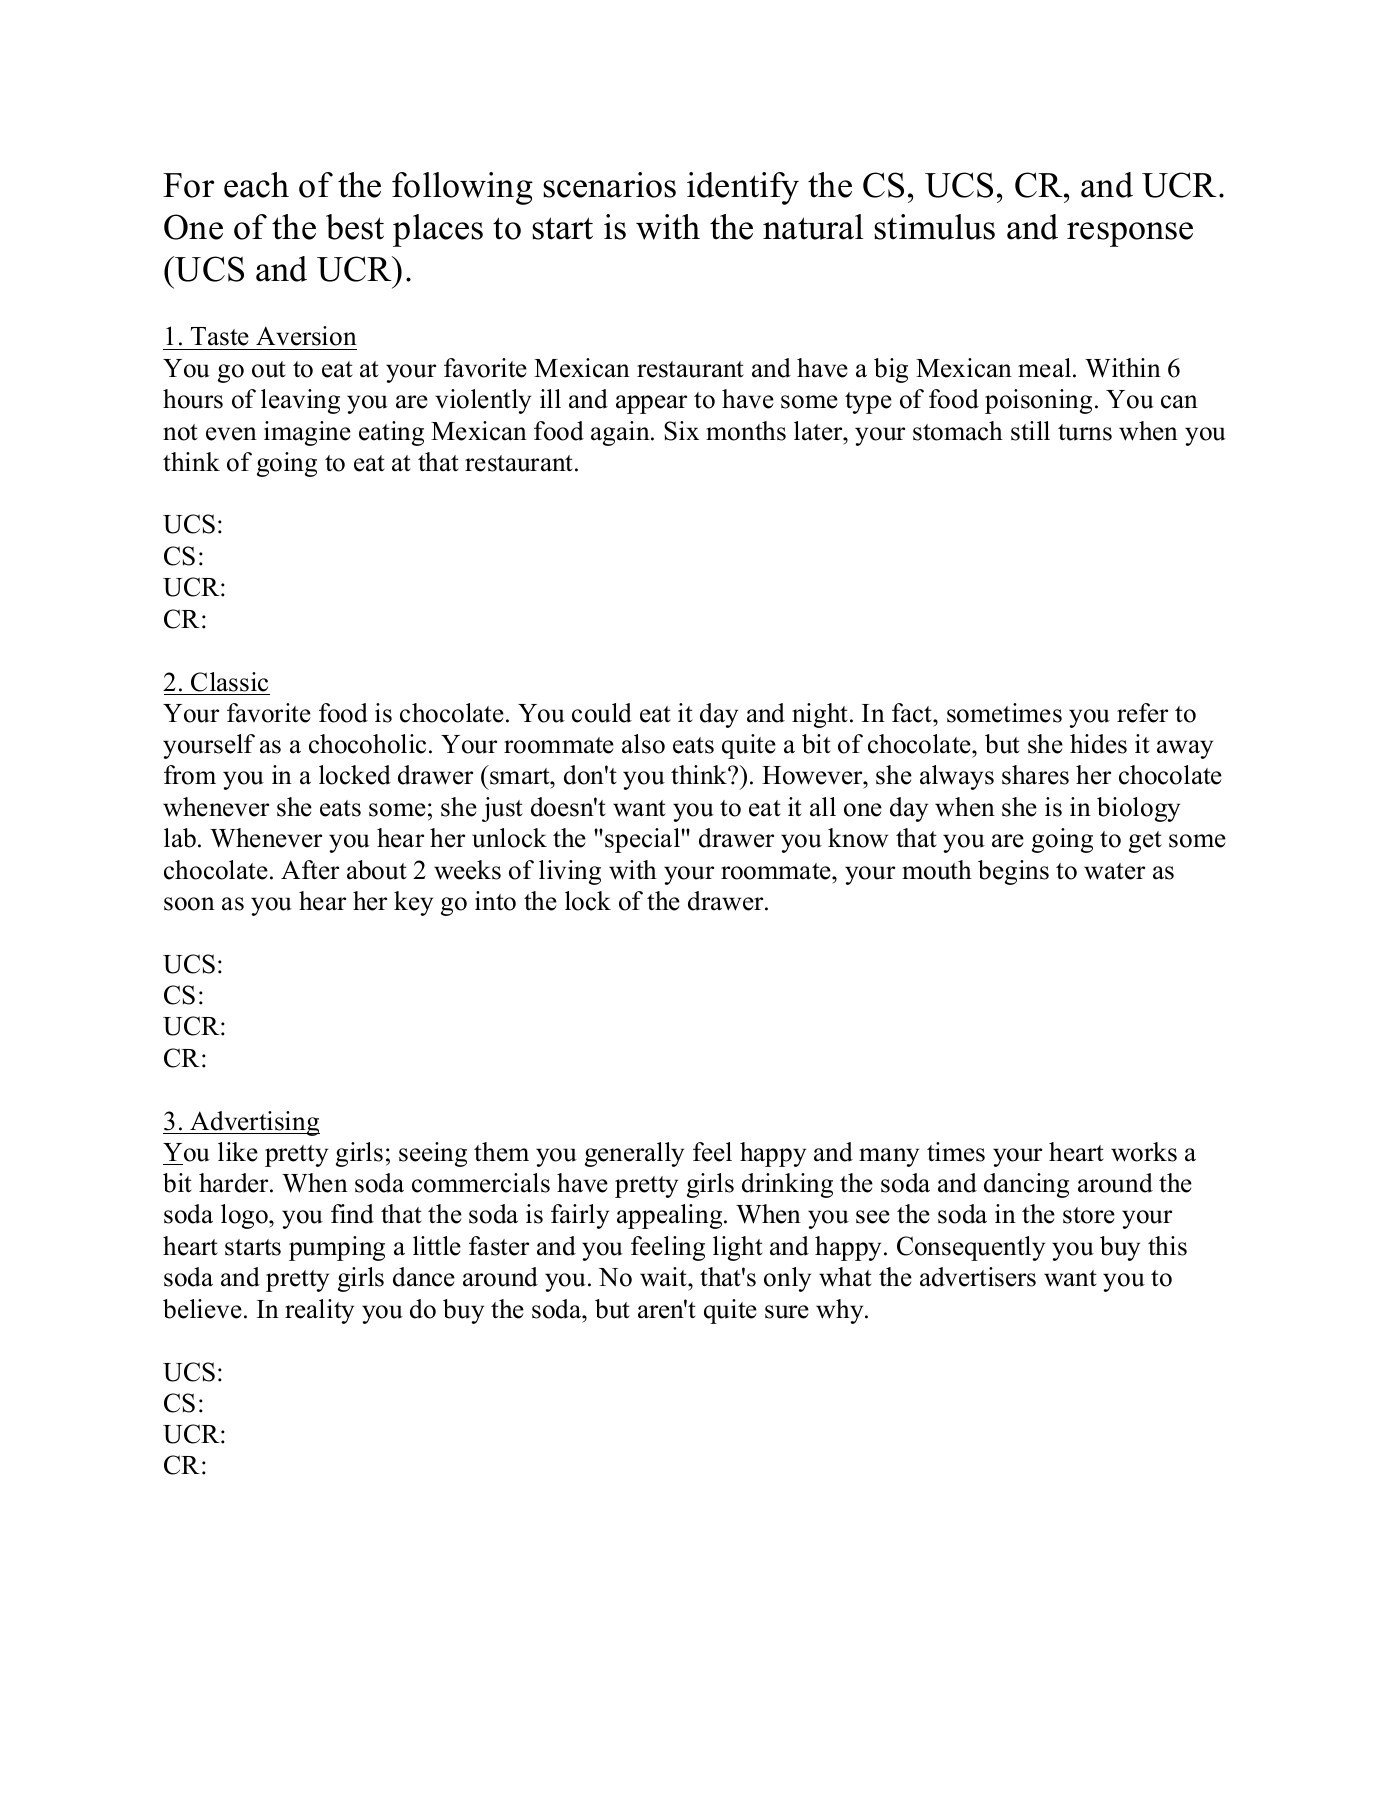 Classical Conditioning Worksheet 2  Lps Pages 1  4  Text Version Throughout Classical Conditioning Worksheet